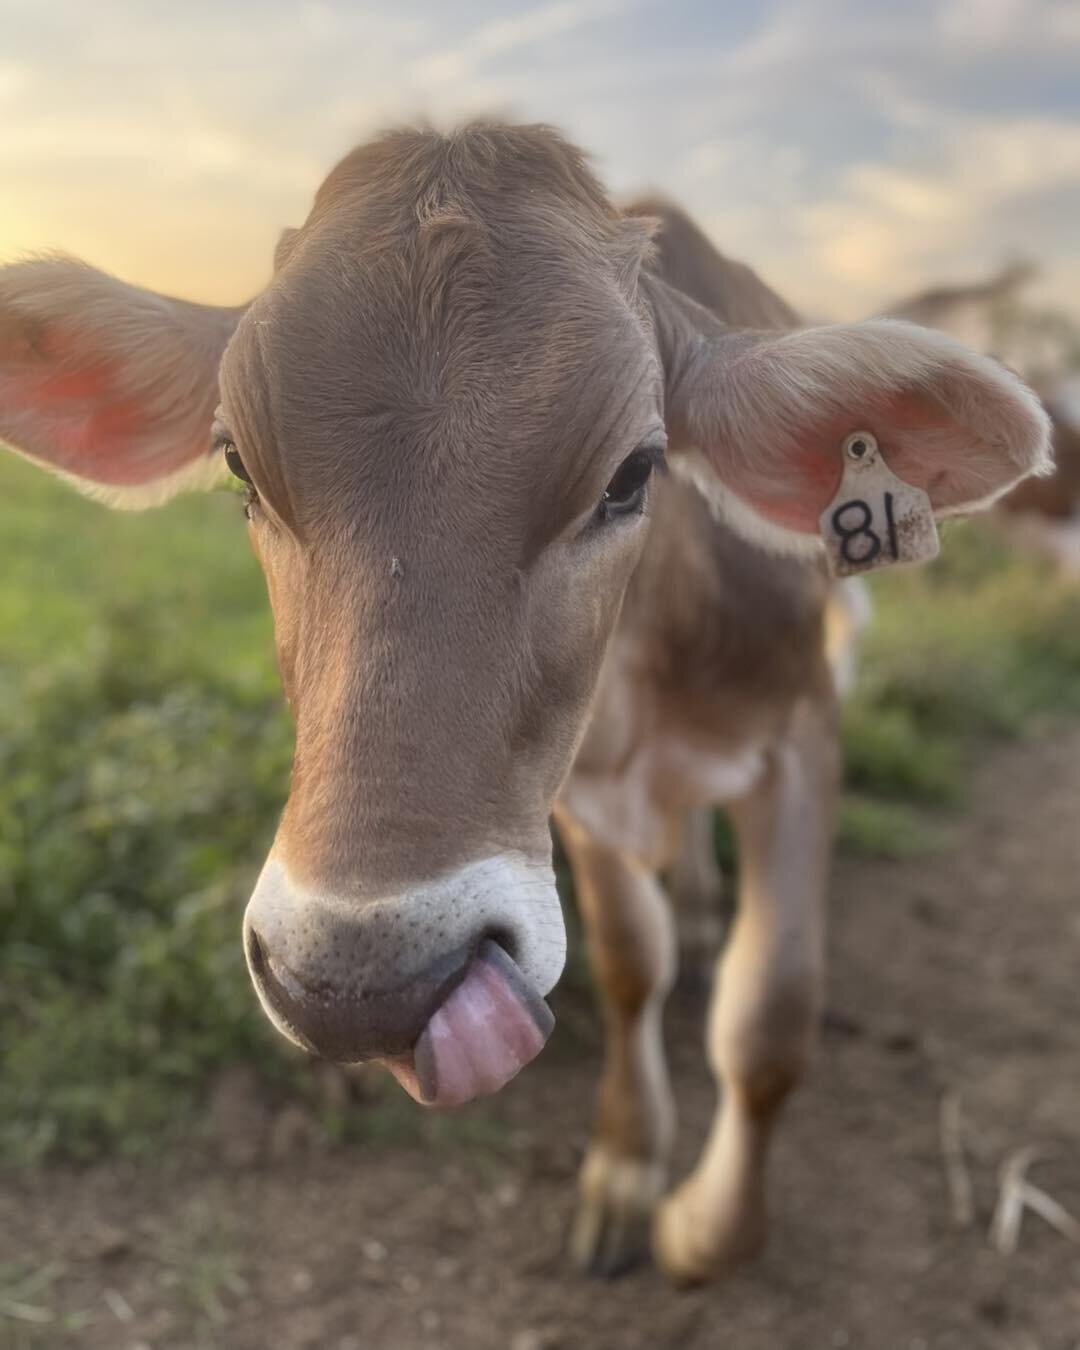 Did someone say it was Tuesd&hellip;I mean #TongueOutTuesday?!

#brownswiss #browncow #dairycows #dairy #heifer #kyag365 #kentuckyproud #kyproud